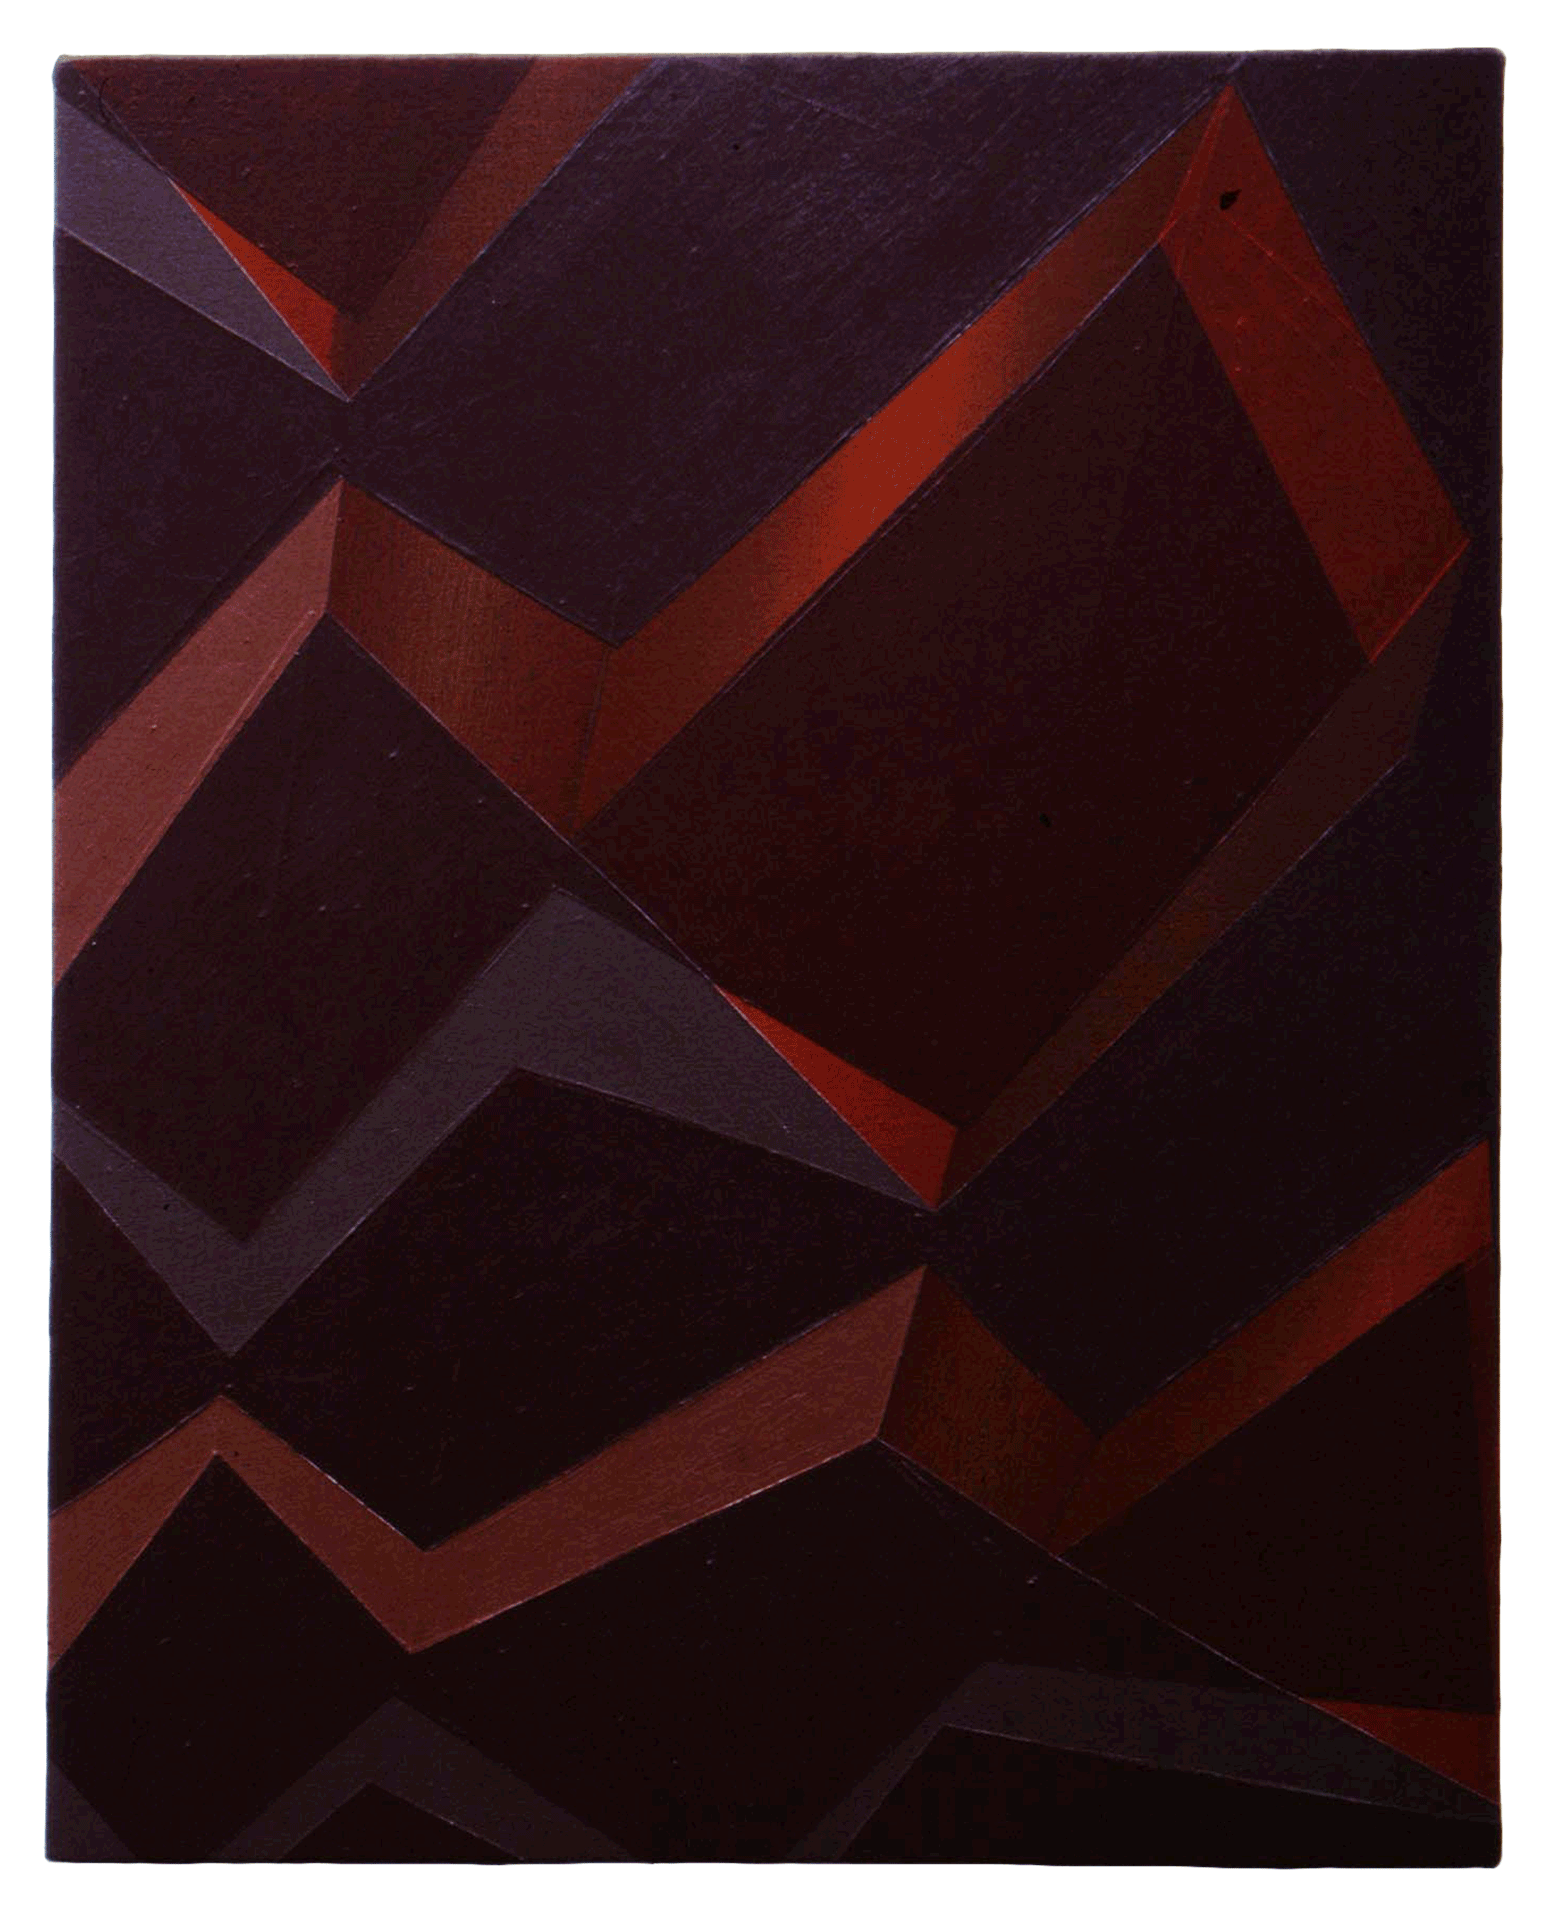 A painting by Tomma Abts, titled Zaarke, dated 2000.